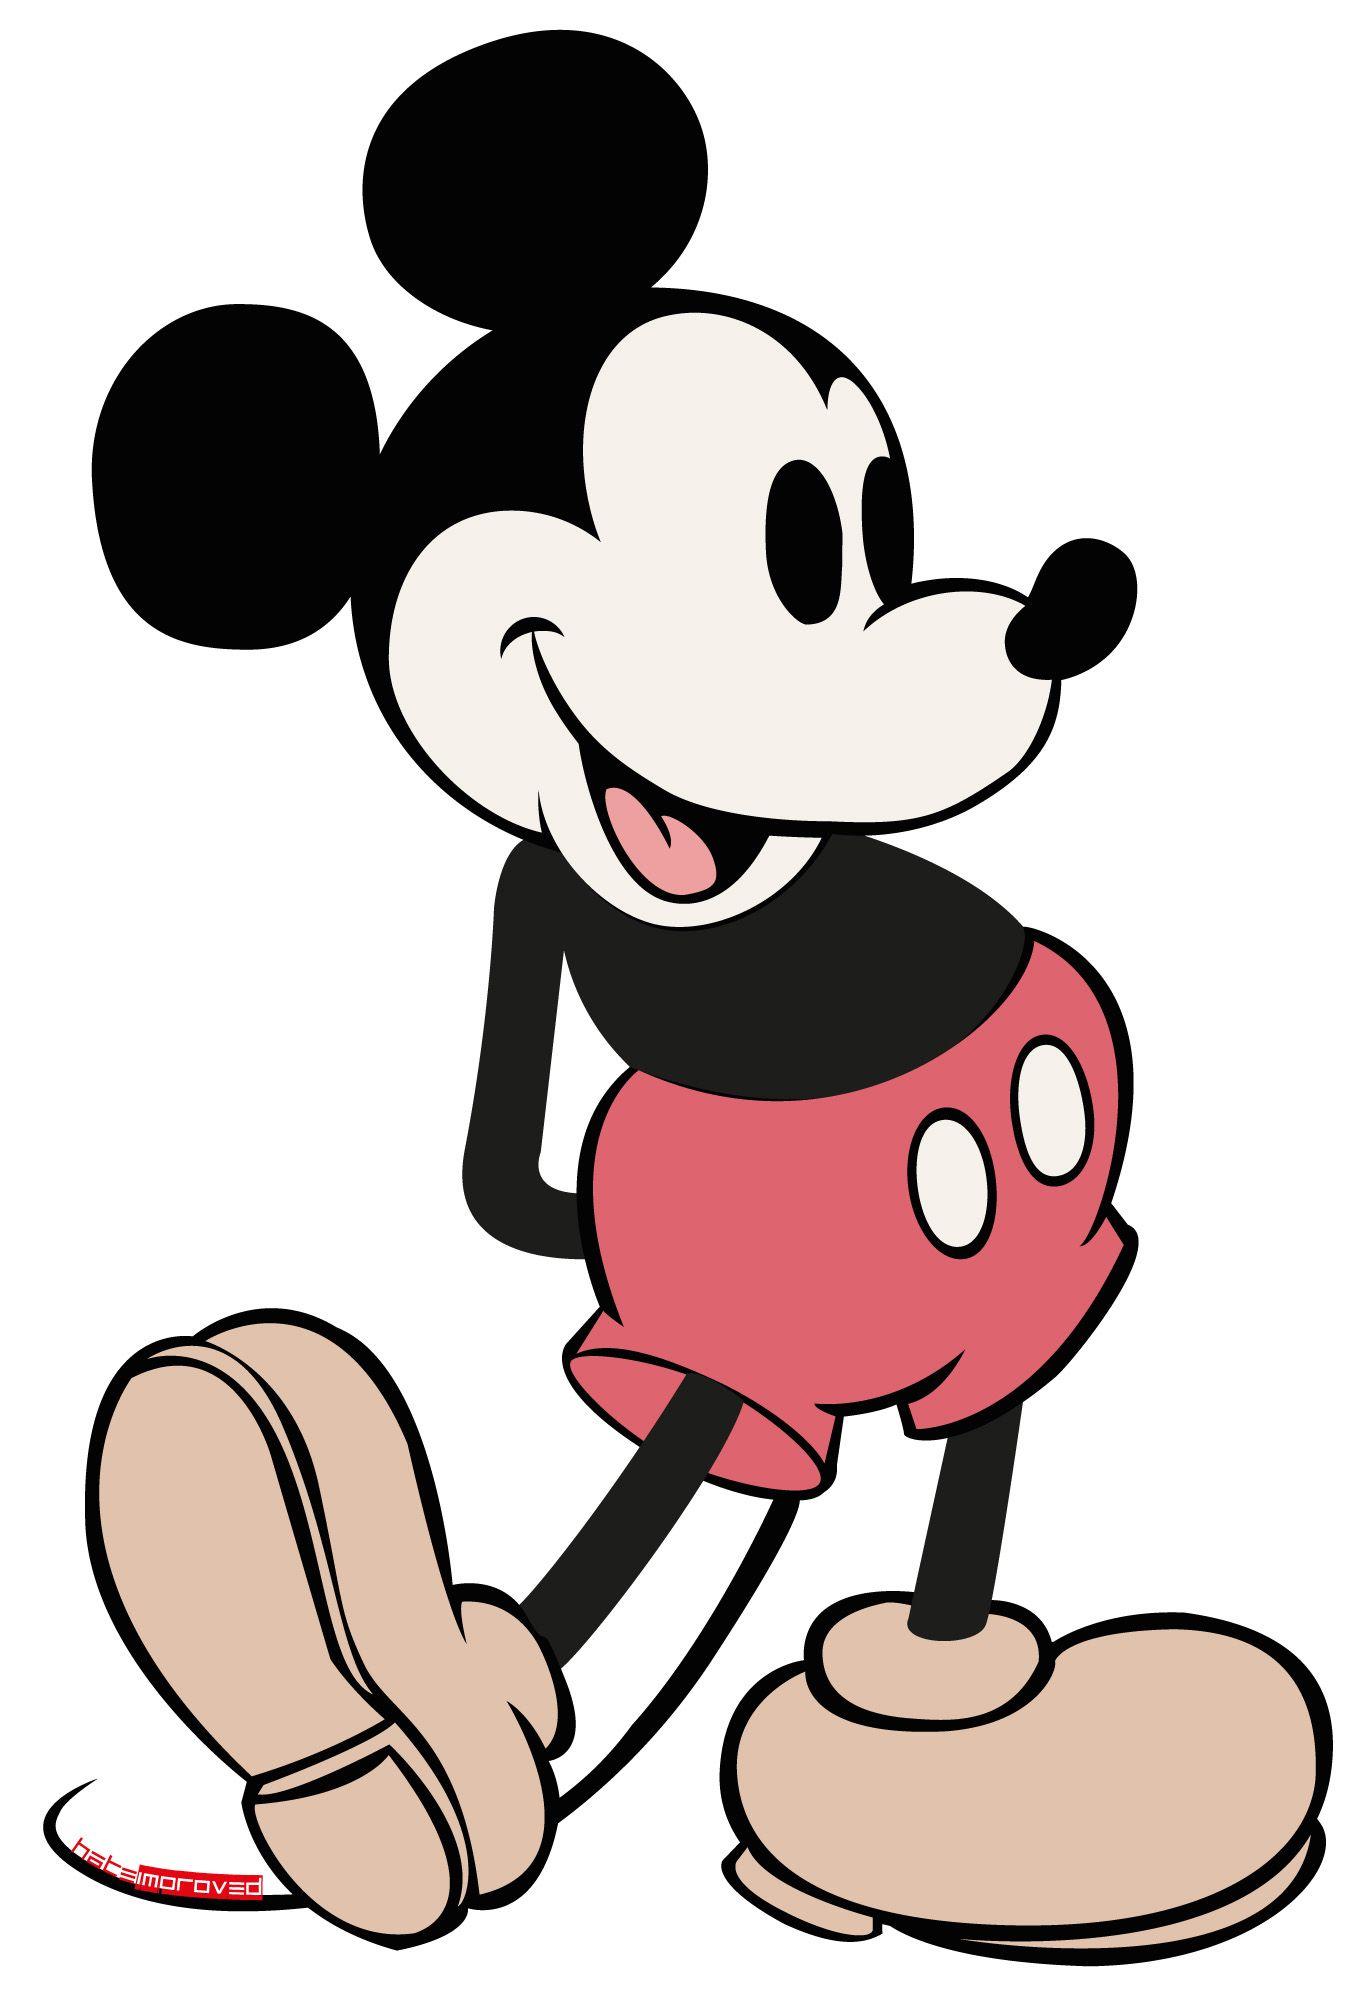 Old Mickey Mouse Logo - Free Mickey Mouse Vector, Download Free Clip Art, Free Clip Art on ...